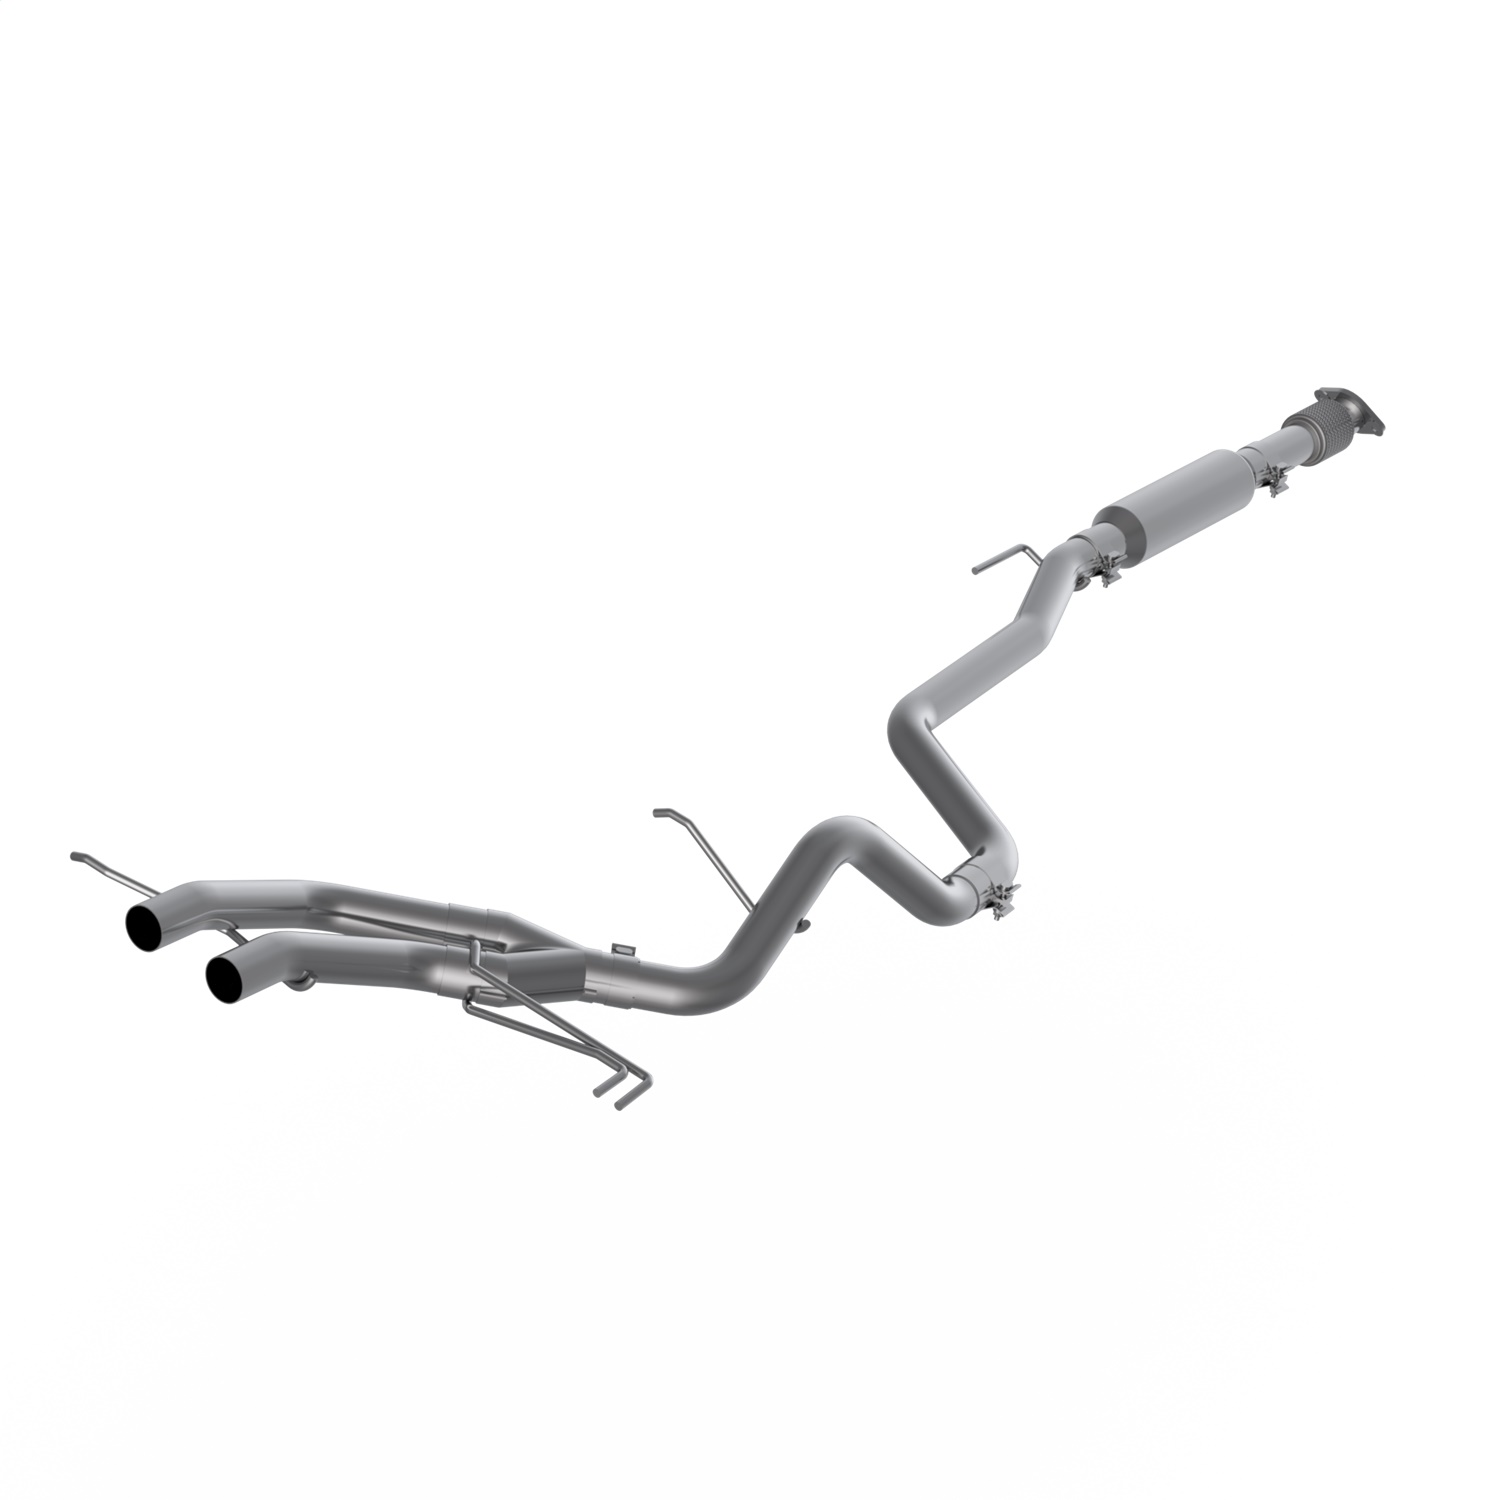 MBRP Exhaust S4702304 Armor Pro Cat Back Exhaust System Fits 13-17 Veloster